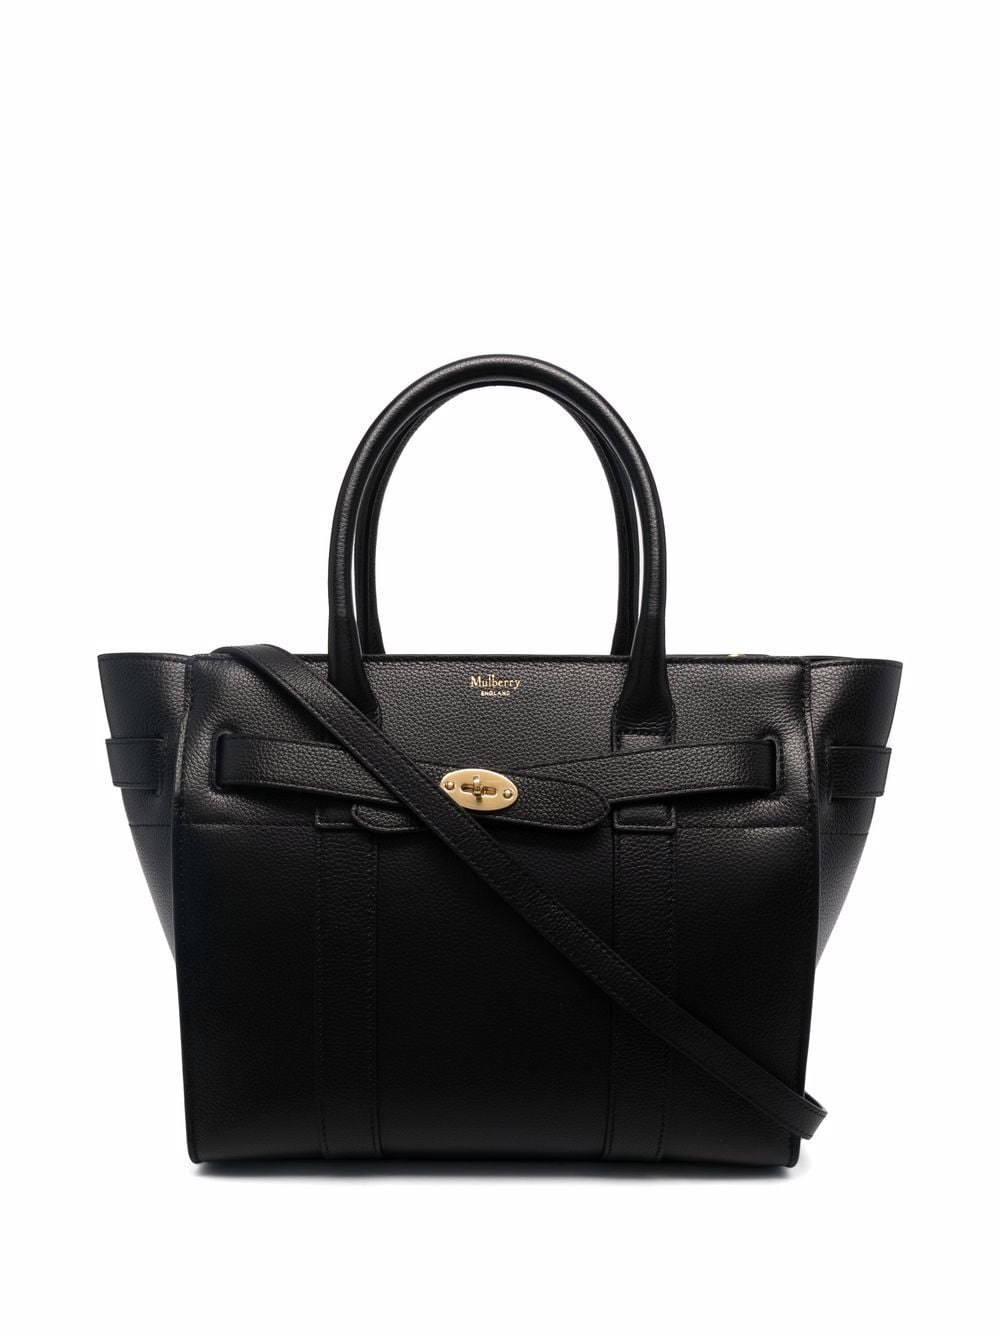 Mulberry Bayswater leather tote bag - Black von Mulberry